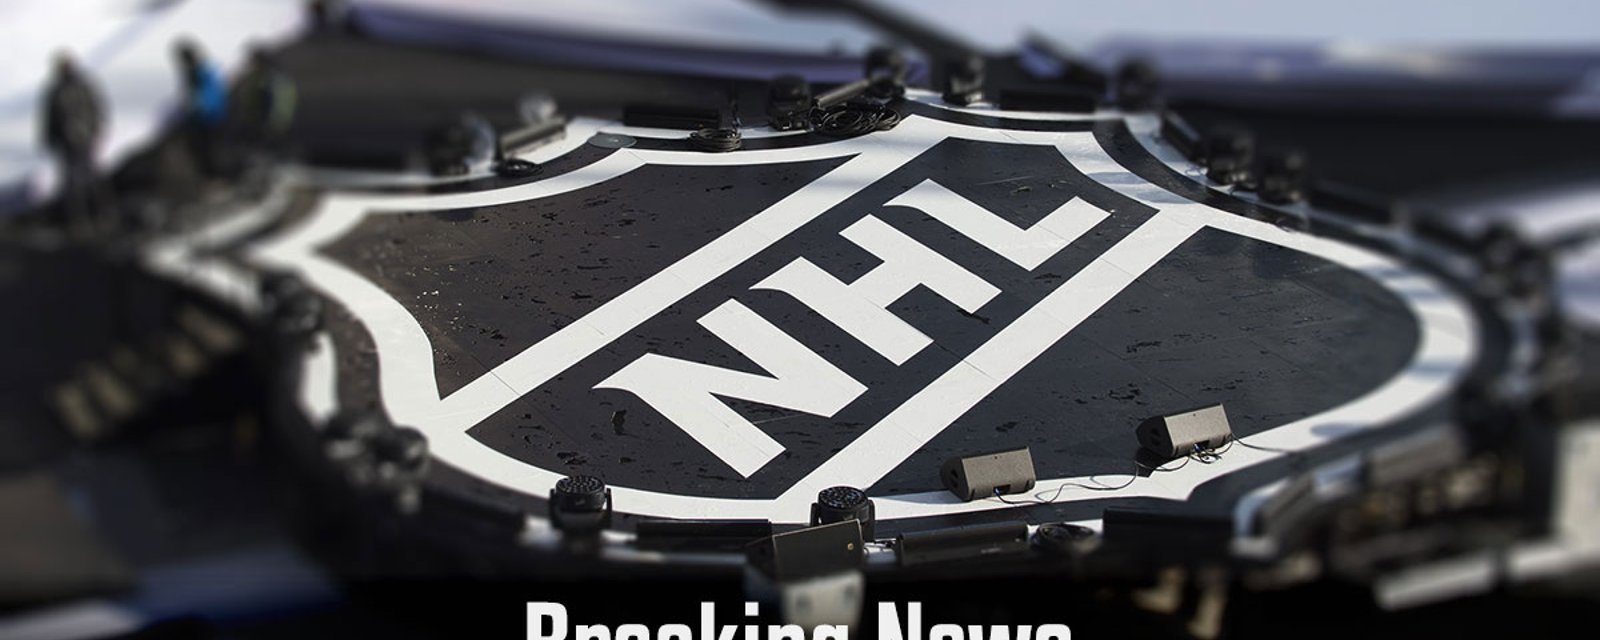 Rumor: NHL team looking at a major shake up after rough start to the season.